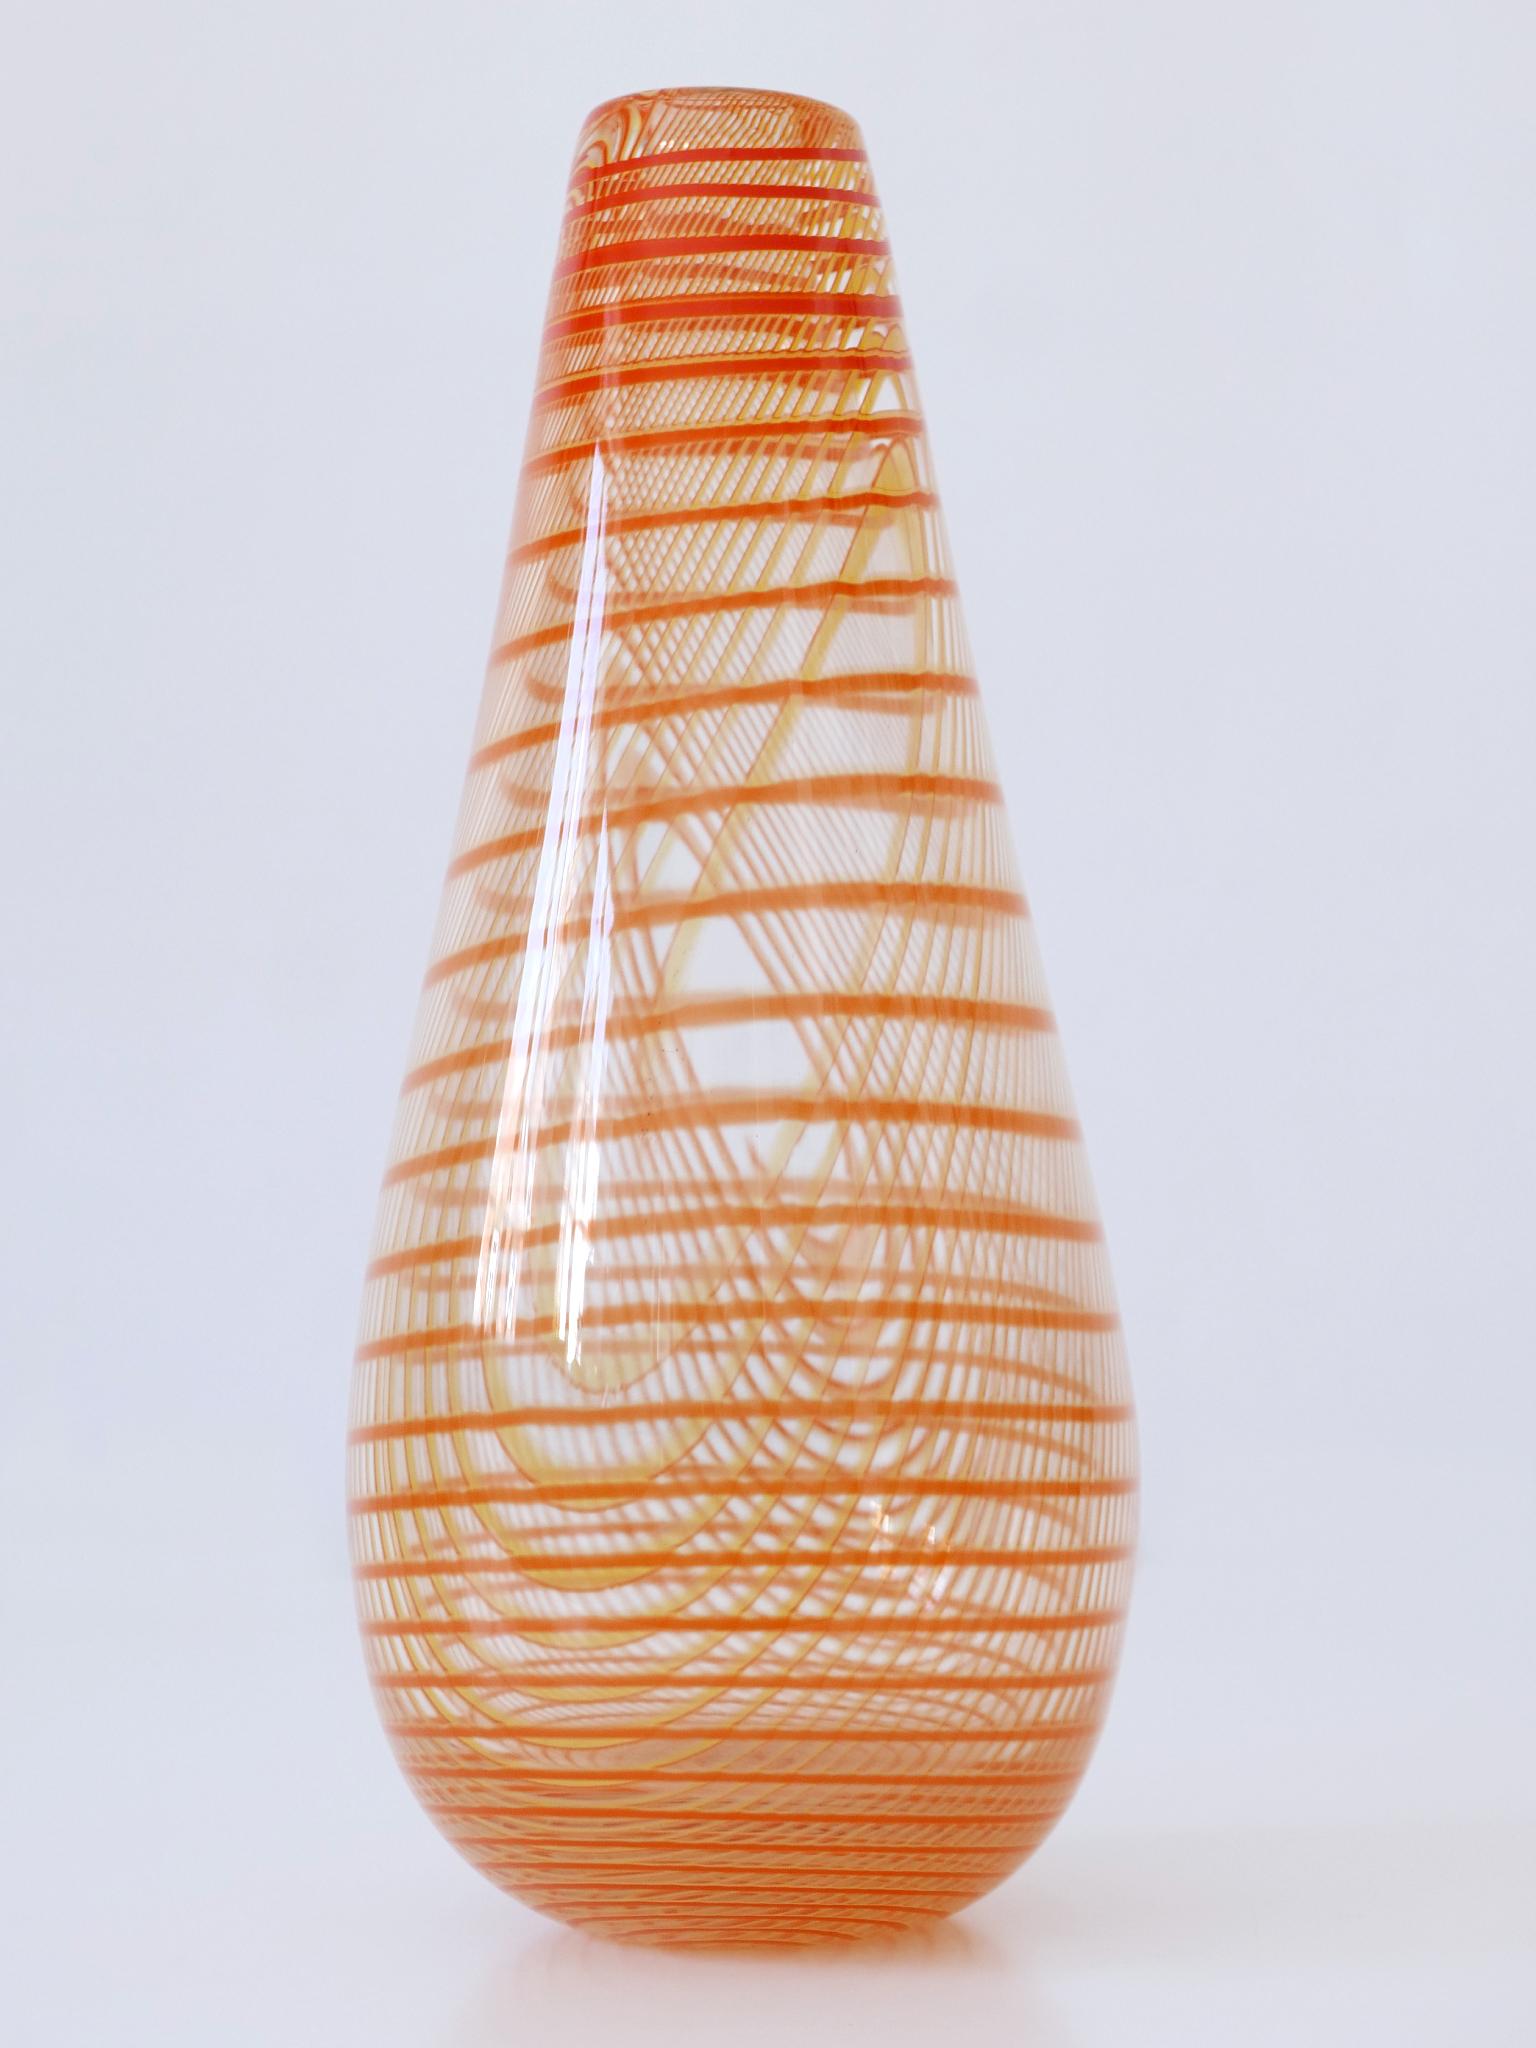 Swedish Signed & Limited Edition Art Glass Vase by Olle Brozén for Kosta Boda Sweden For Sale